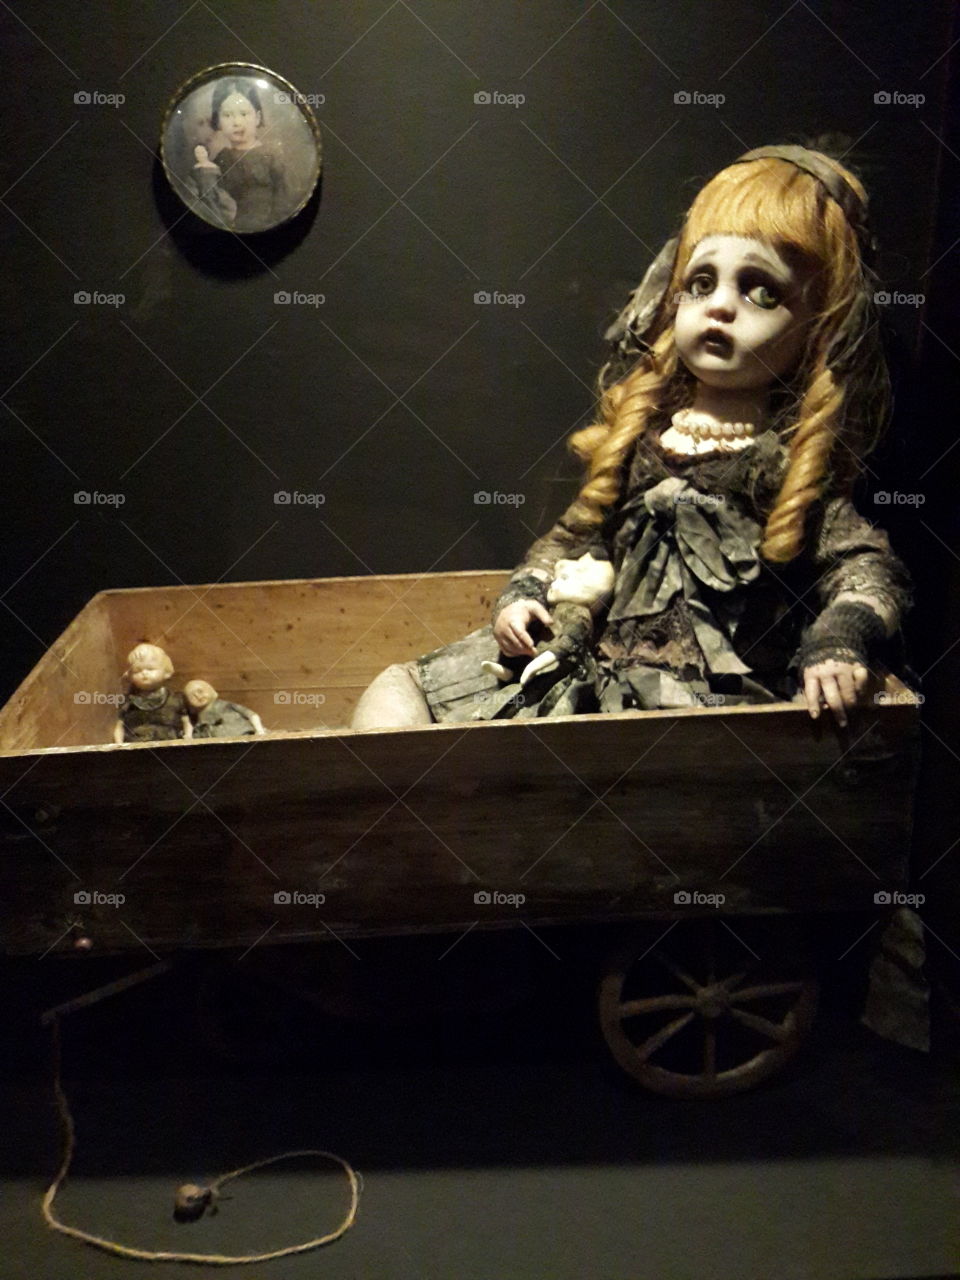 Scary doll